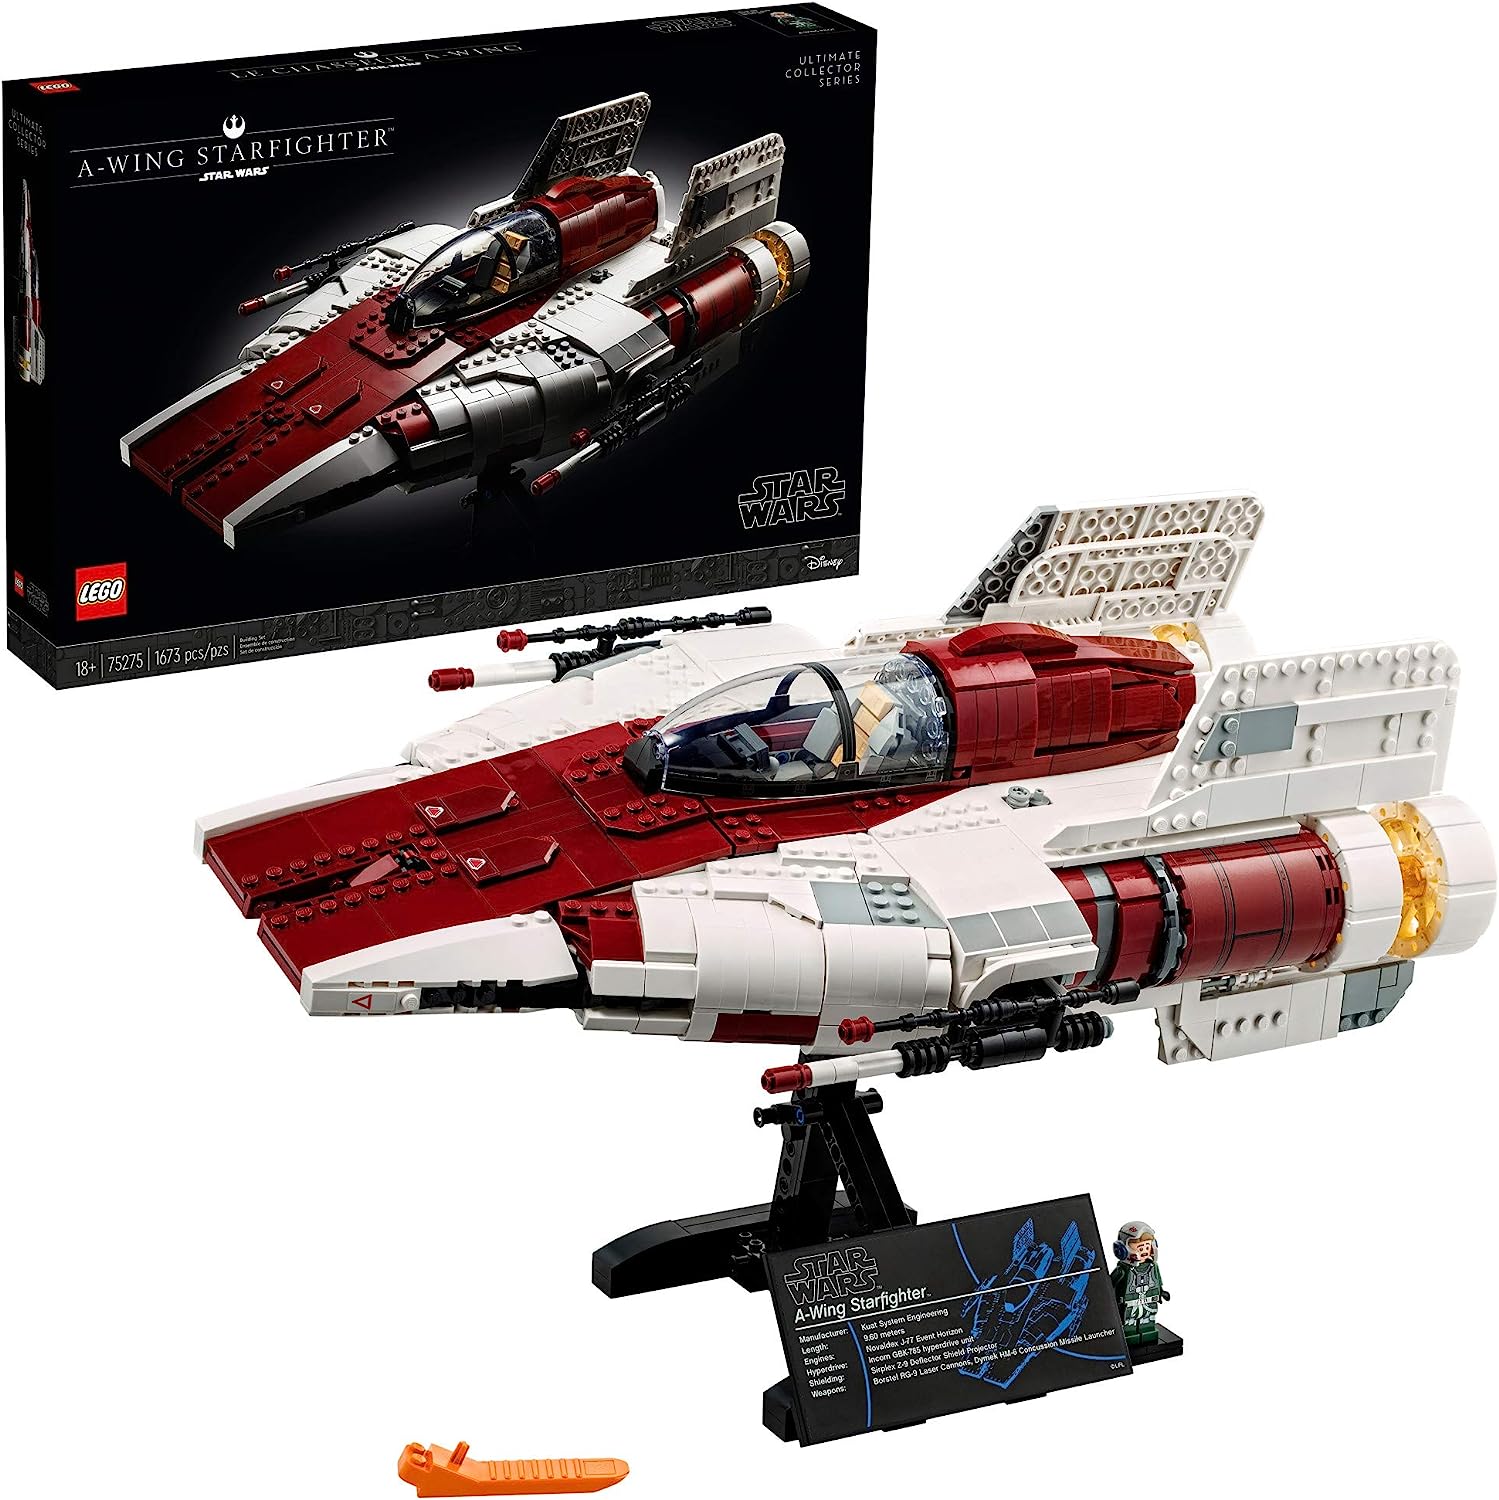 5. LEGO Star Wars UCS A-wing Fighter (#75275) - $149.99 🛩